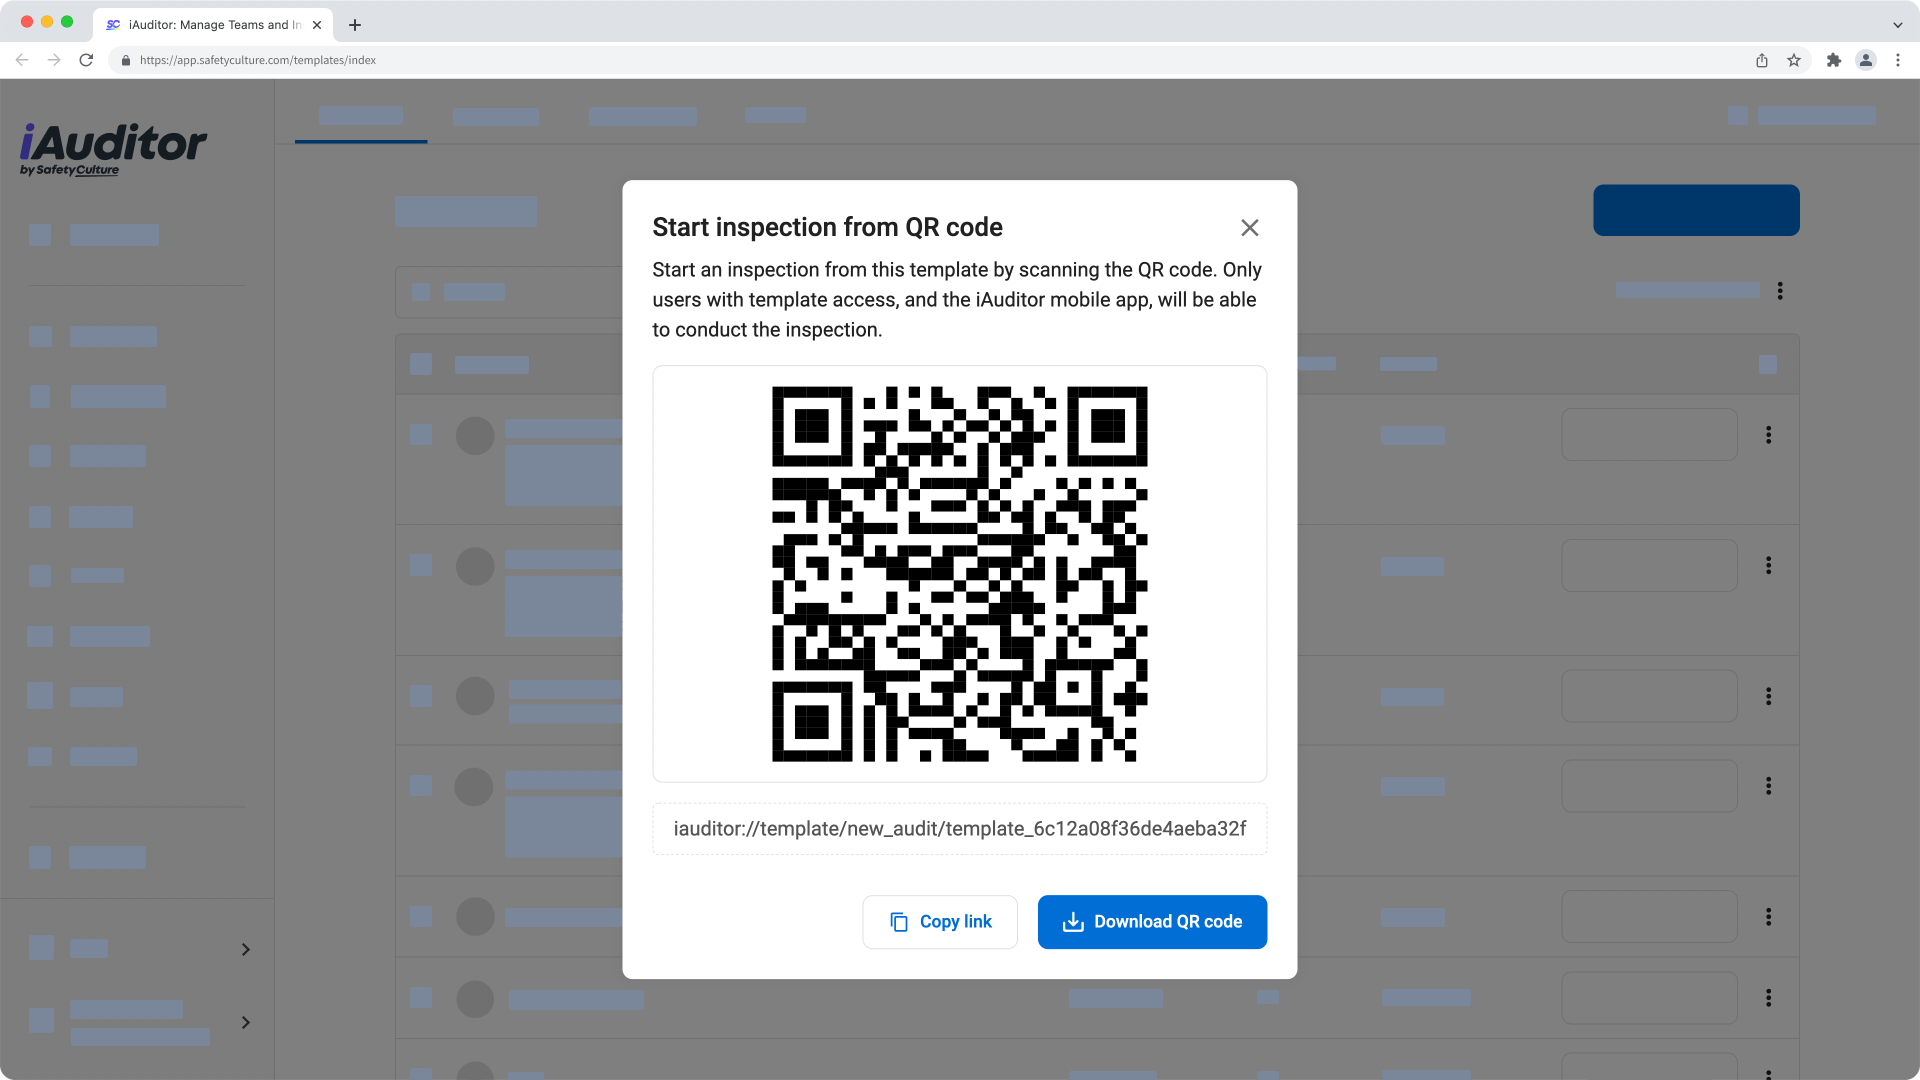 A screenshot showing how to download a 'start inspection' QR code via the web app.